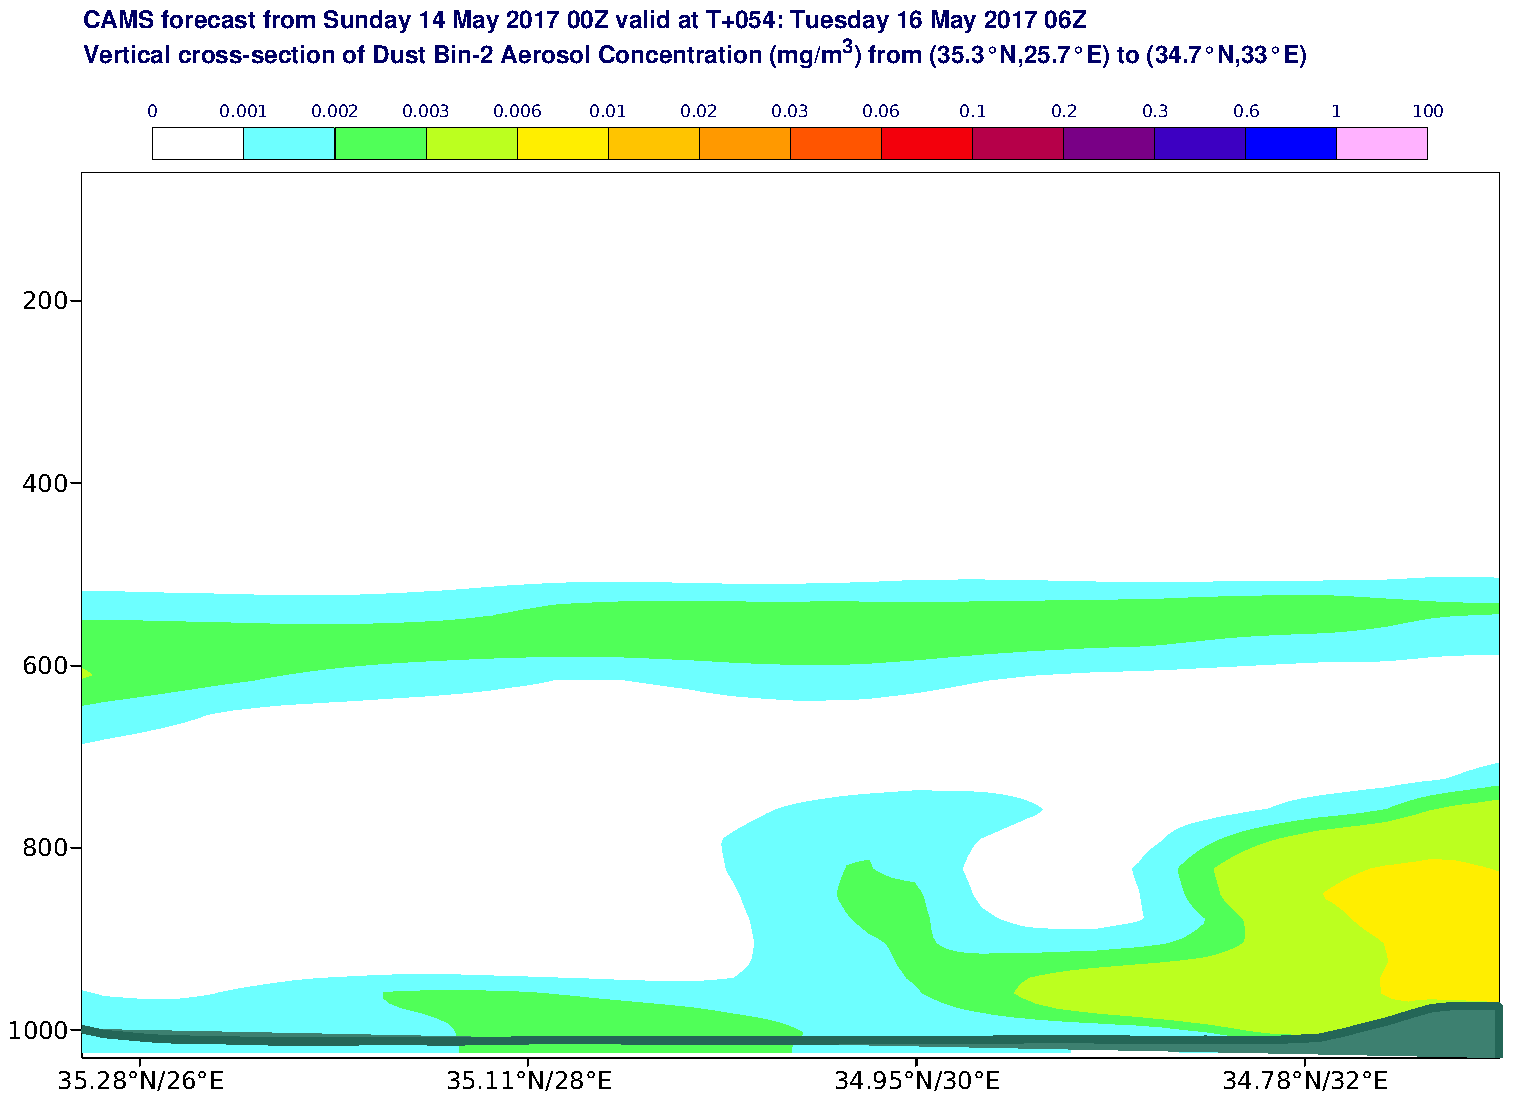 Vertical cross-section of Dust Bin-2 Aerosol Concentration (mg/m3) valid at T54 - 2017-05-16 06:00